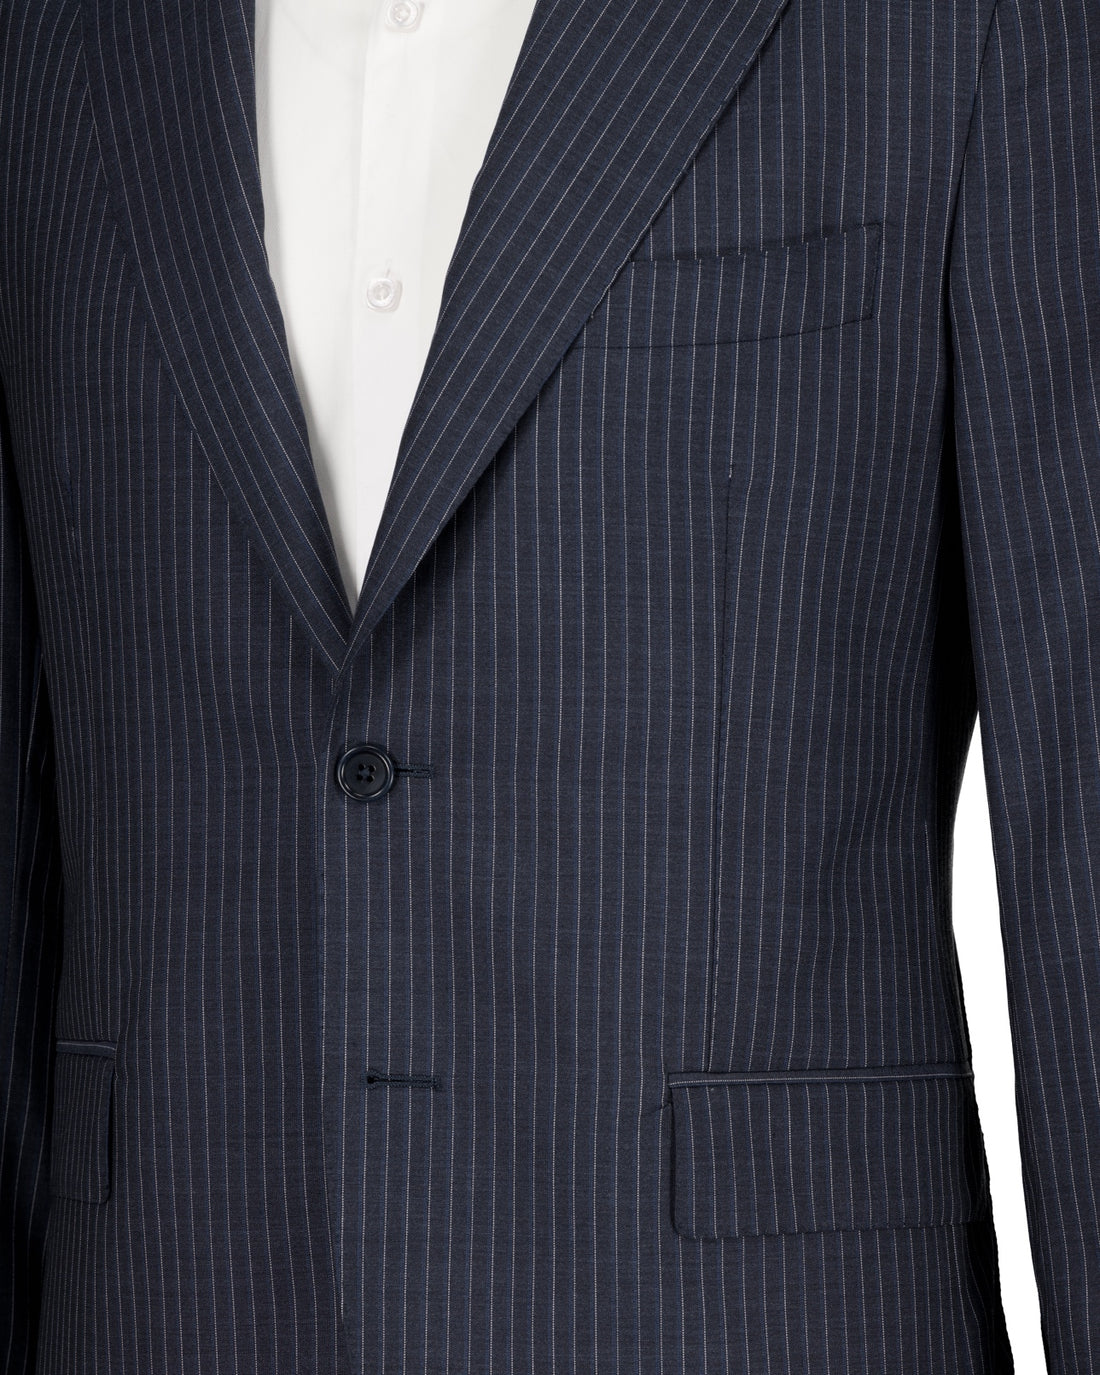 Bruno Zegna Cloth Suit - Navy - Made in Italy